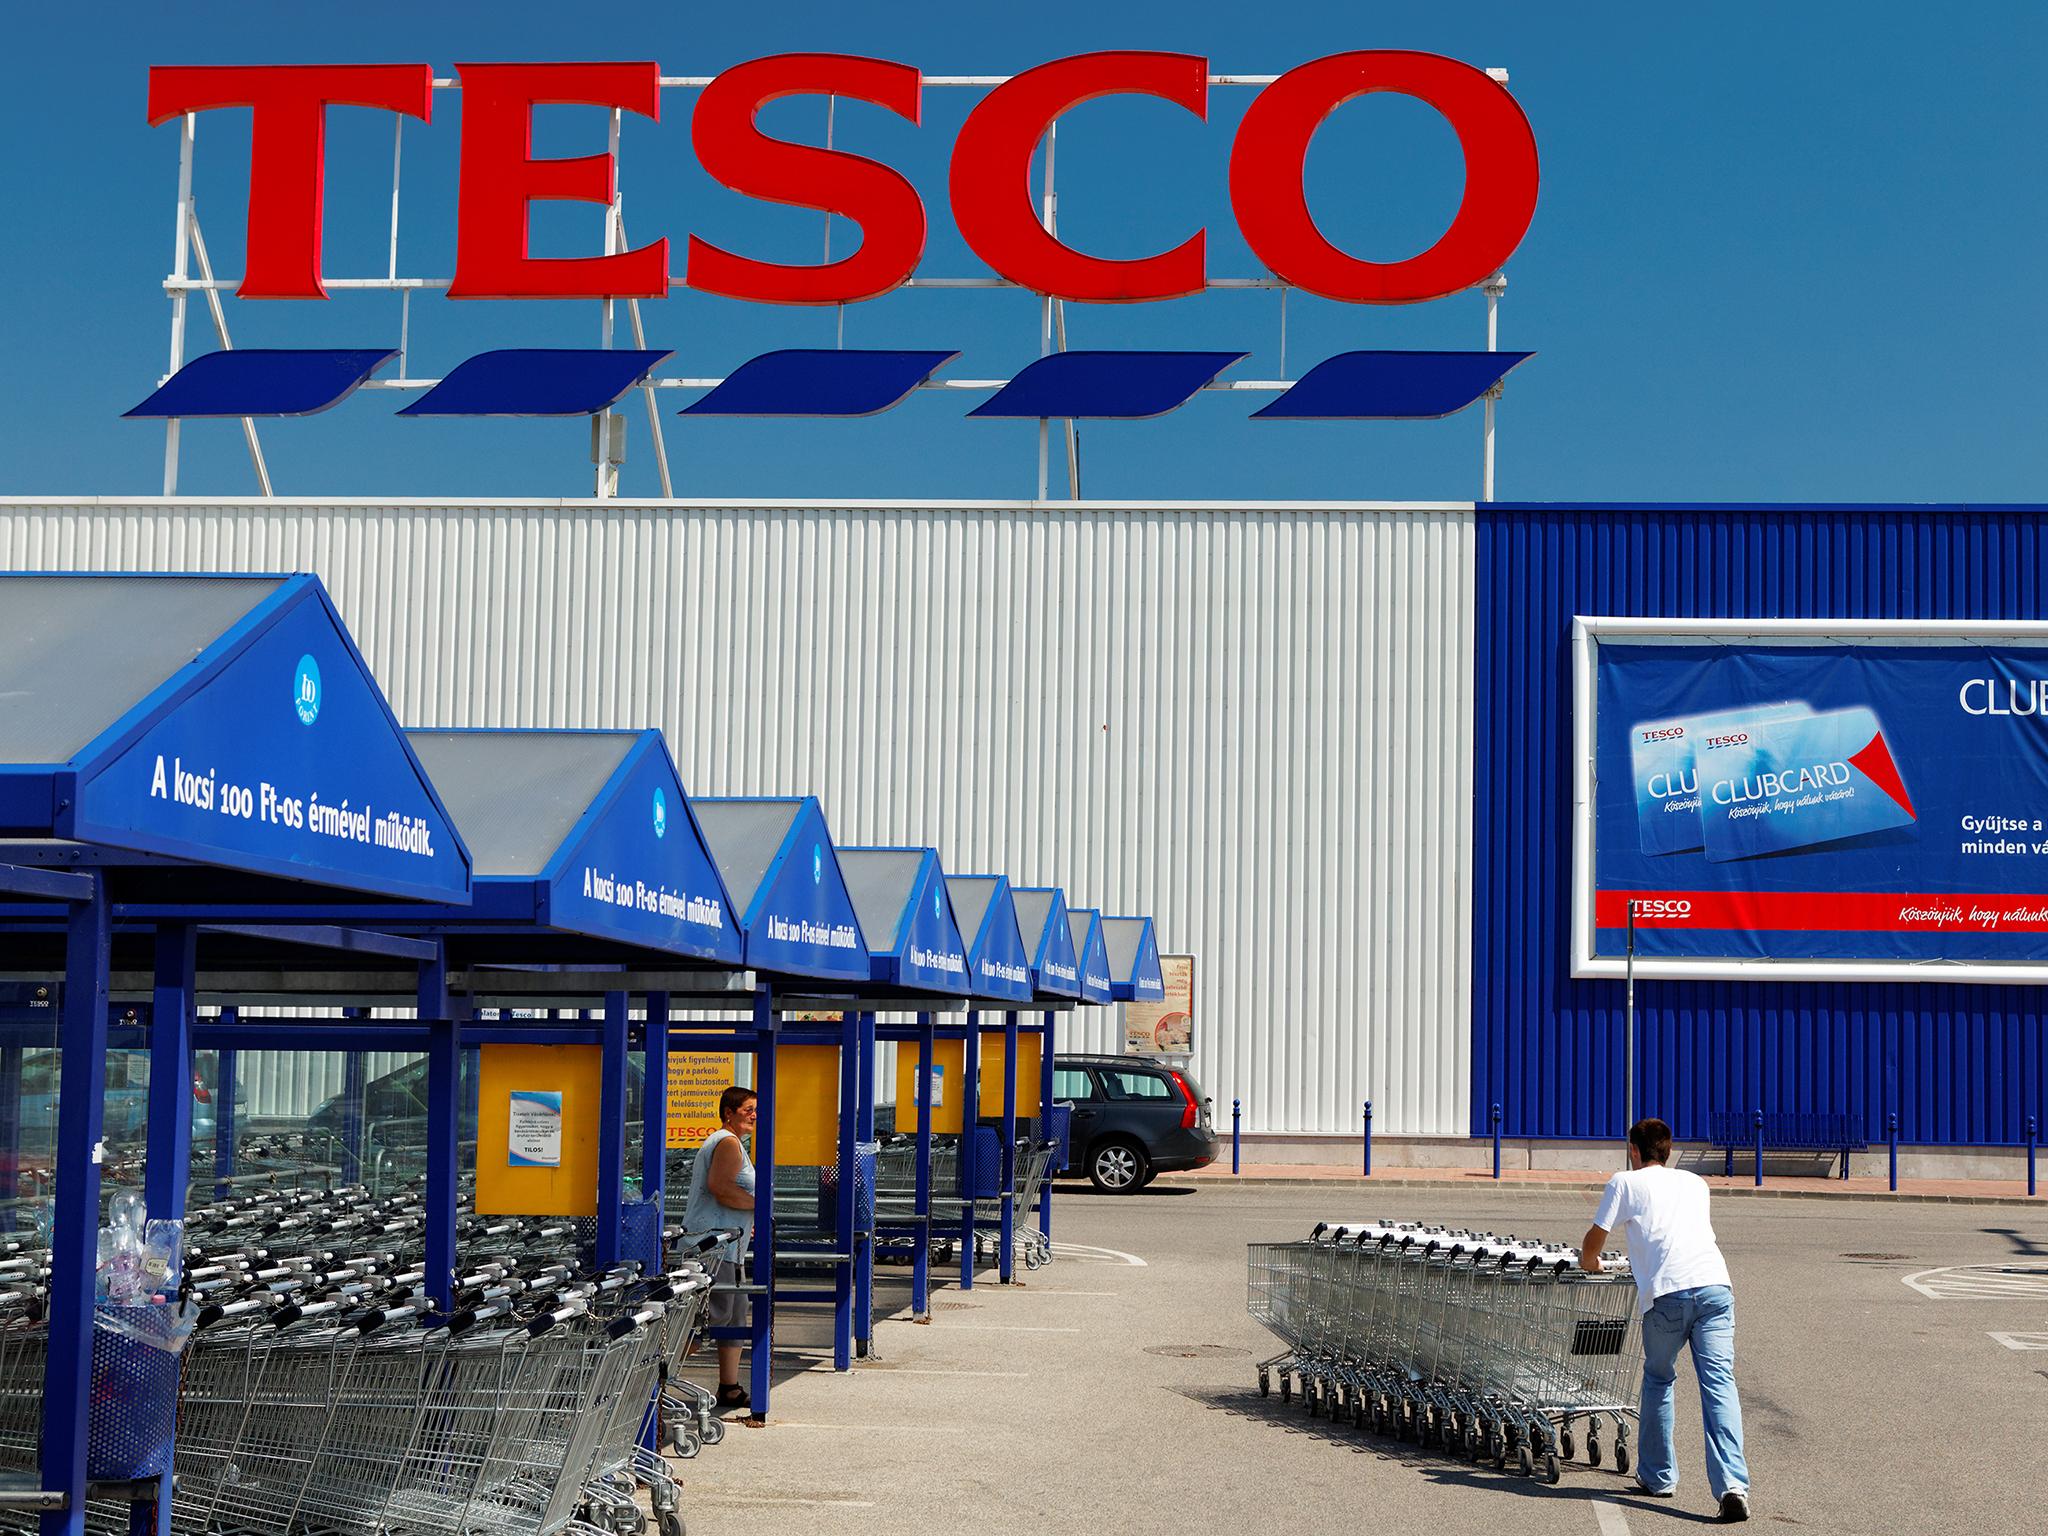 Tesco‘s partnership with Carrefour is not for all tastes and recalls the ‘Marmite wars’